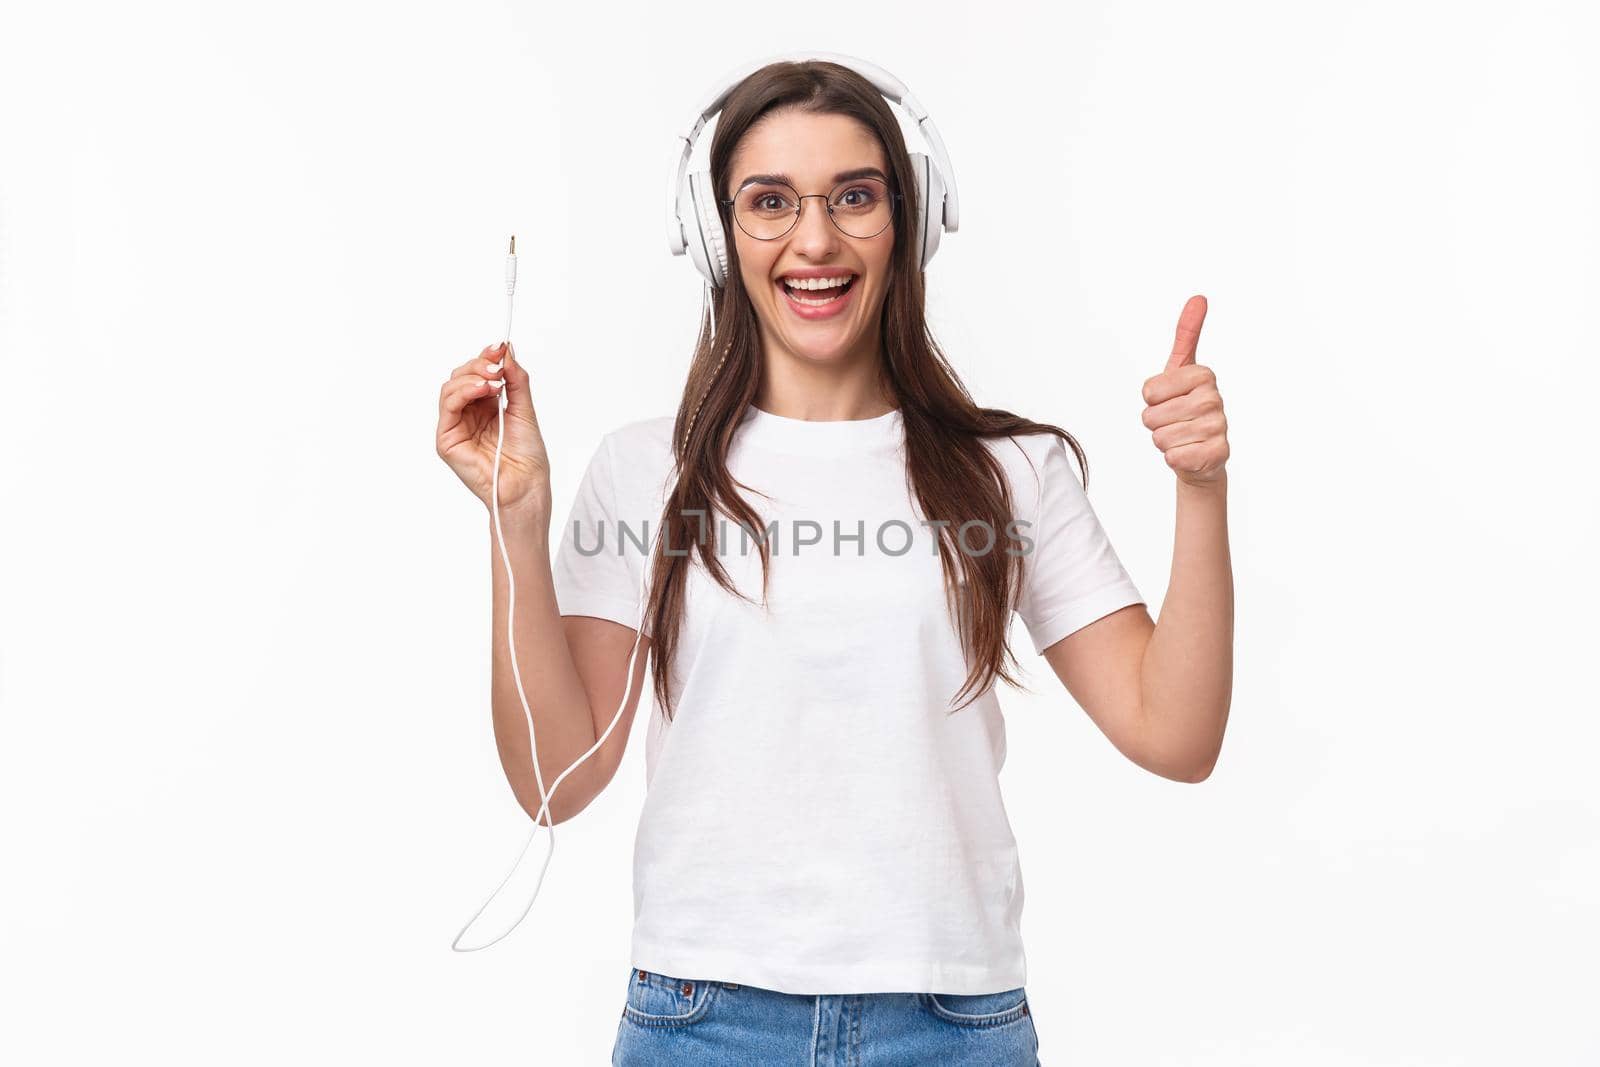 Waist-up portrait of excited, smiling happy and enthusiastic young girl in headphones, holding wire of earphones and show thumbs-up, ready to plug in to smartphone and listen some music.